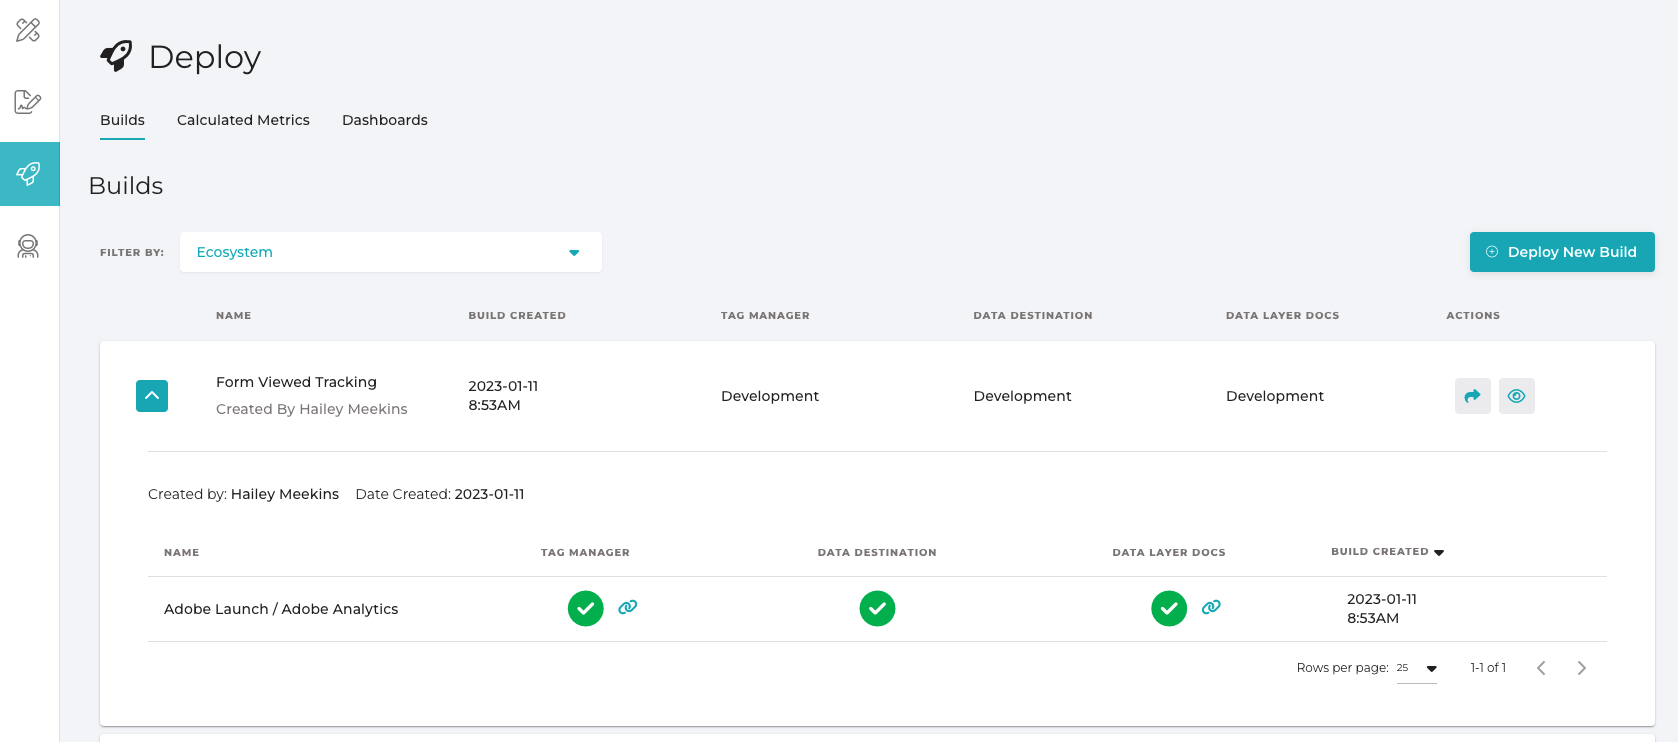 Leverage API connections to deploy your analytics configurations to the tag manager, analytics platform, and version control platform. Afterwards, deploy out-of-the-box or customized dashboards to jumpstart reporting.